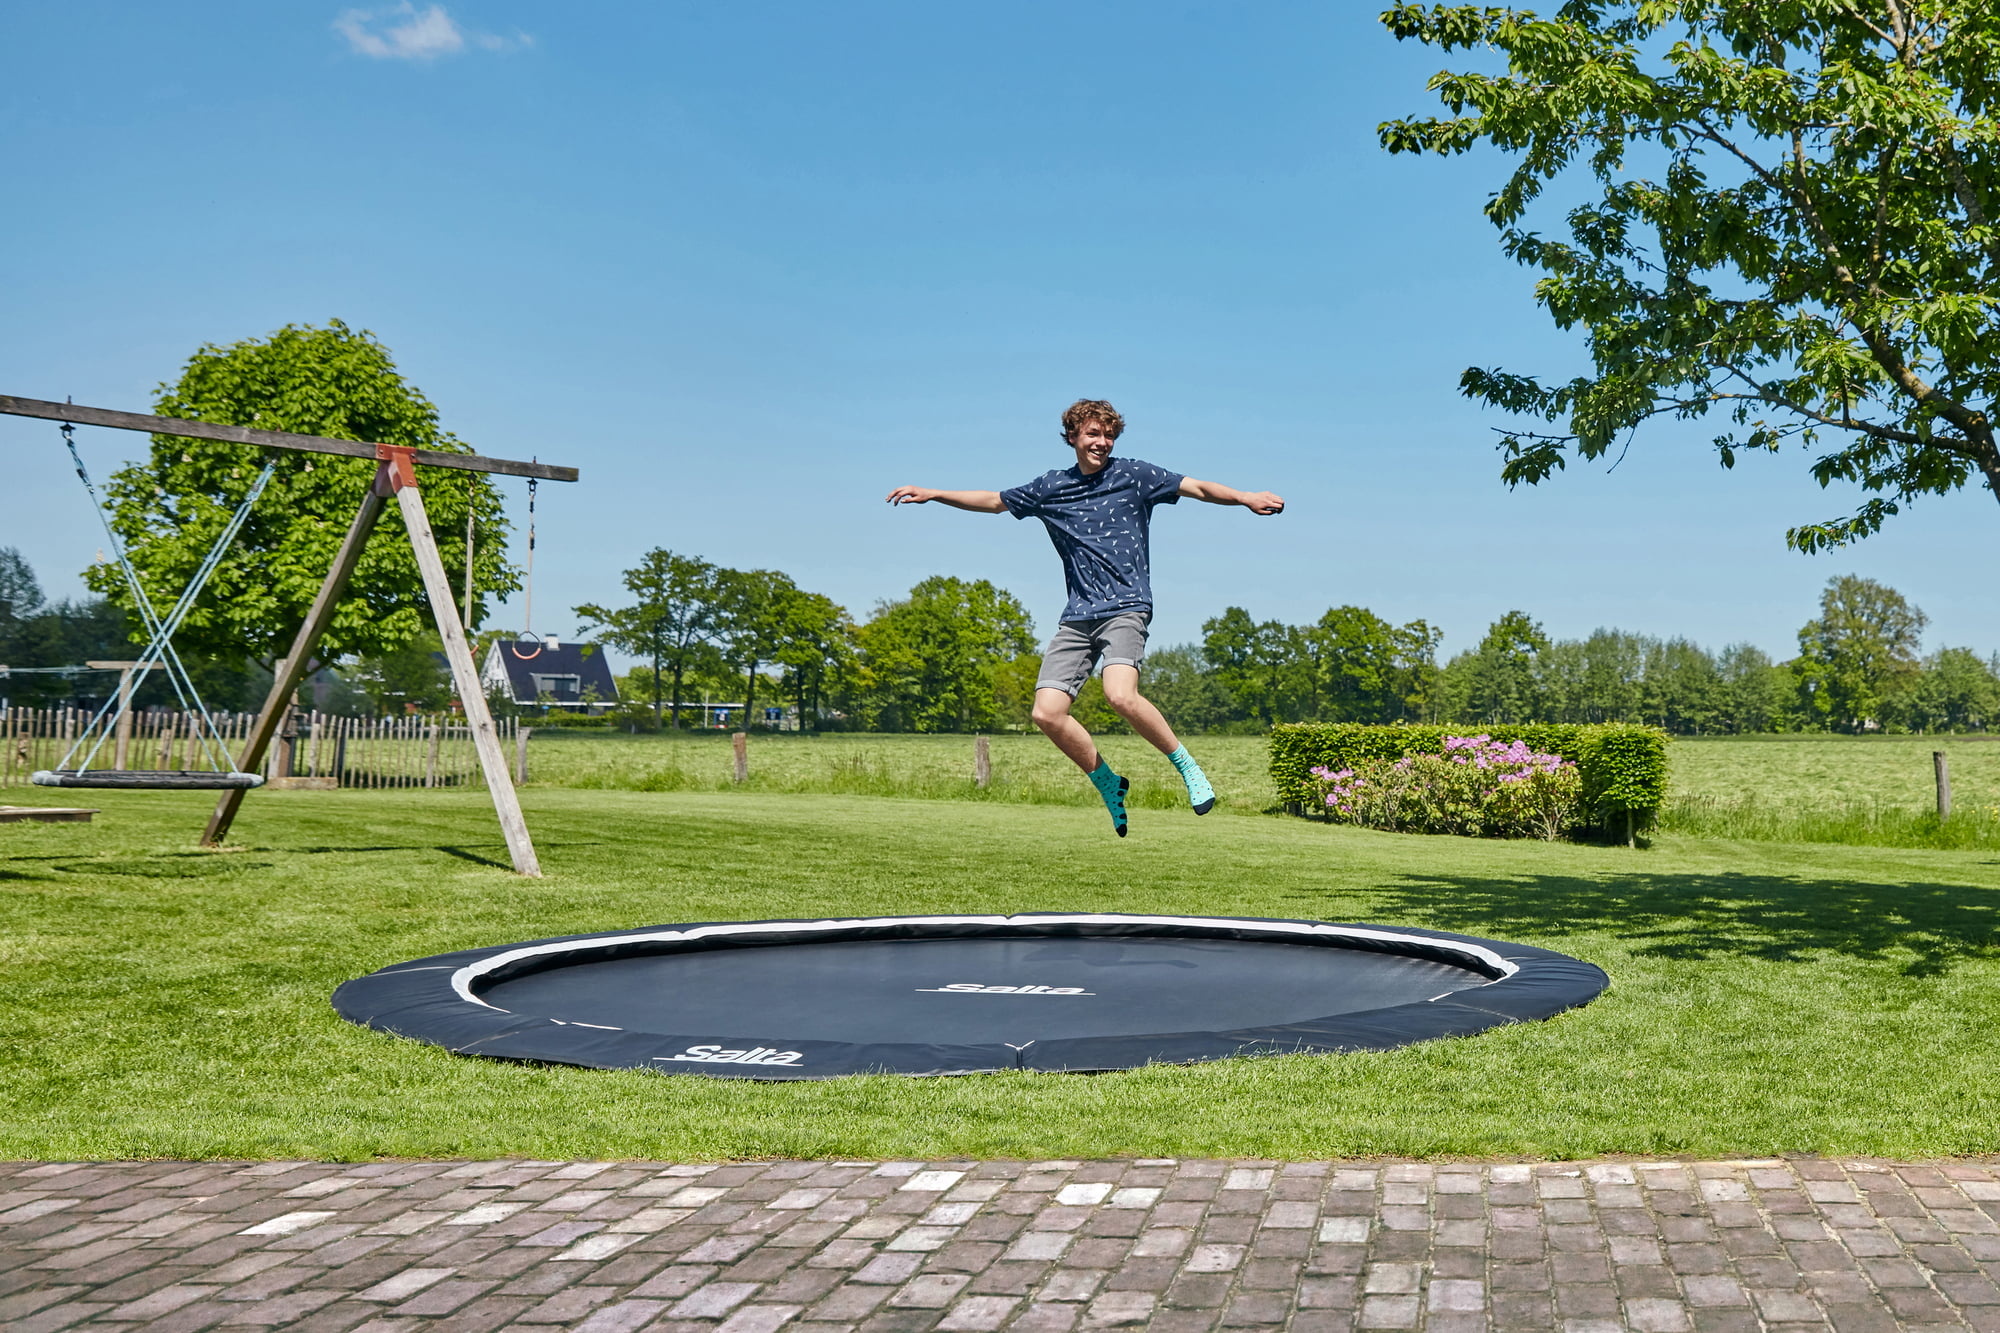 Trampolining: A jumper performs acrobatic tricks using the Salta Royal ground-based trampoline at the city park. 2000x1340 HD Wallpaper.